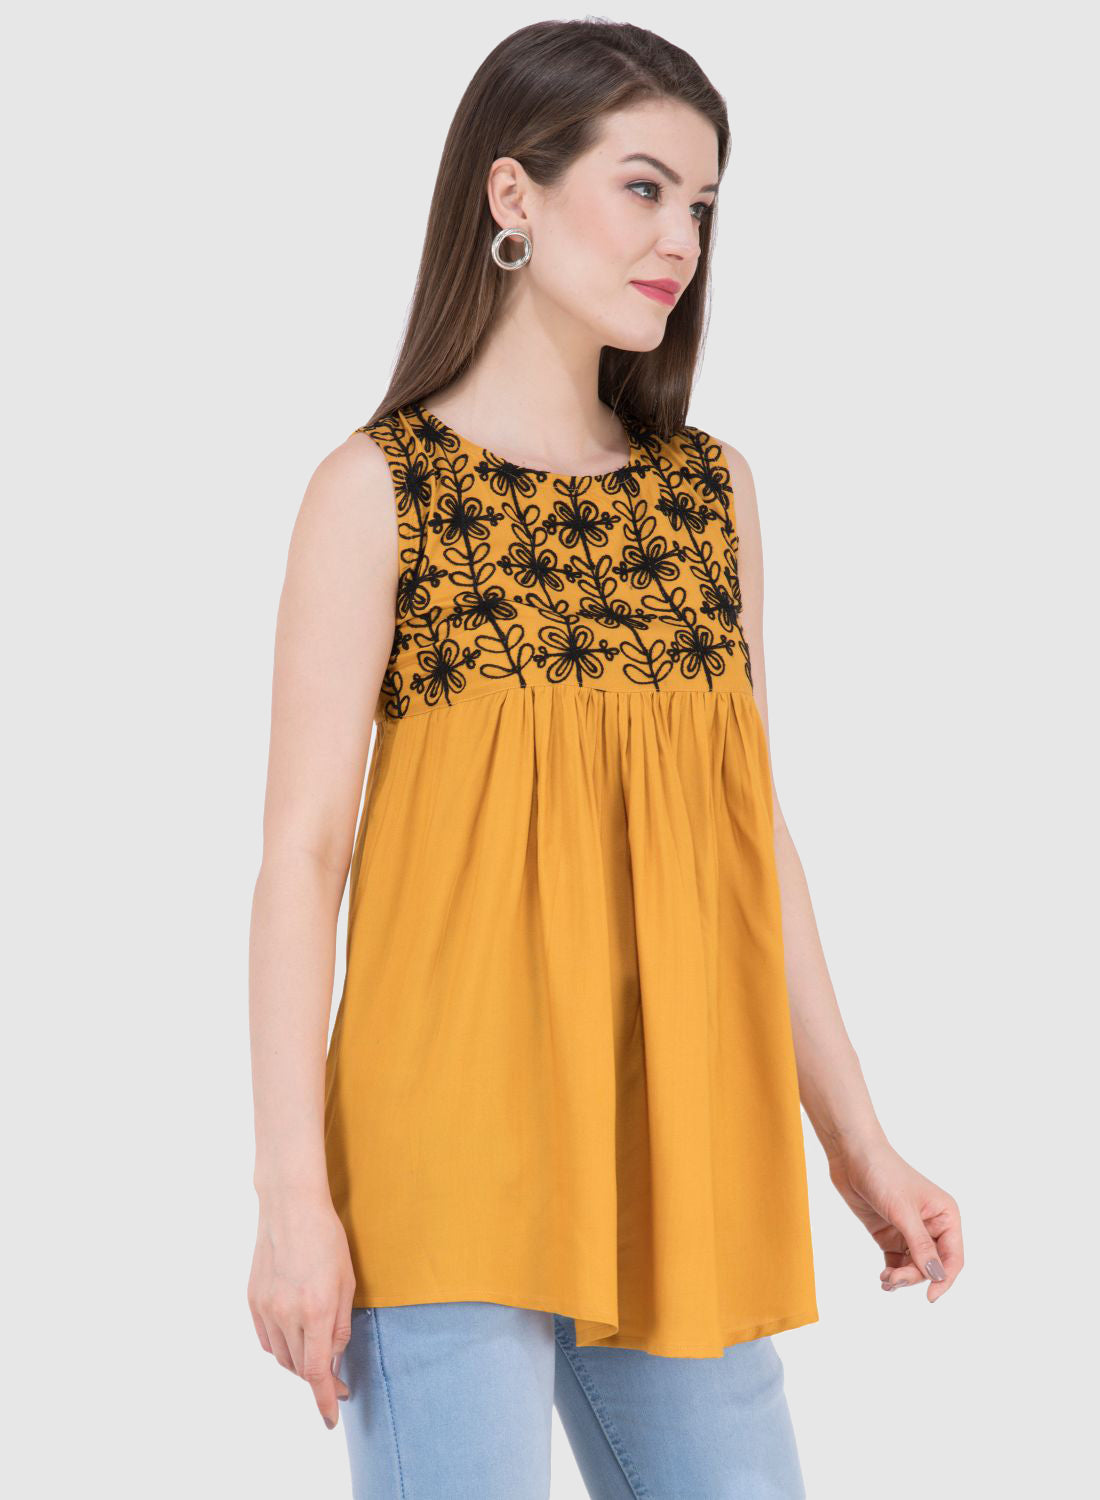 Women Top Mustard Rayon Sleeveless Fit and Flare